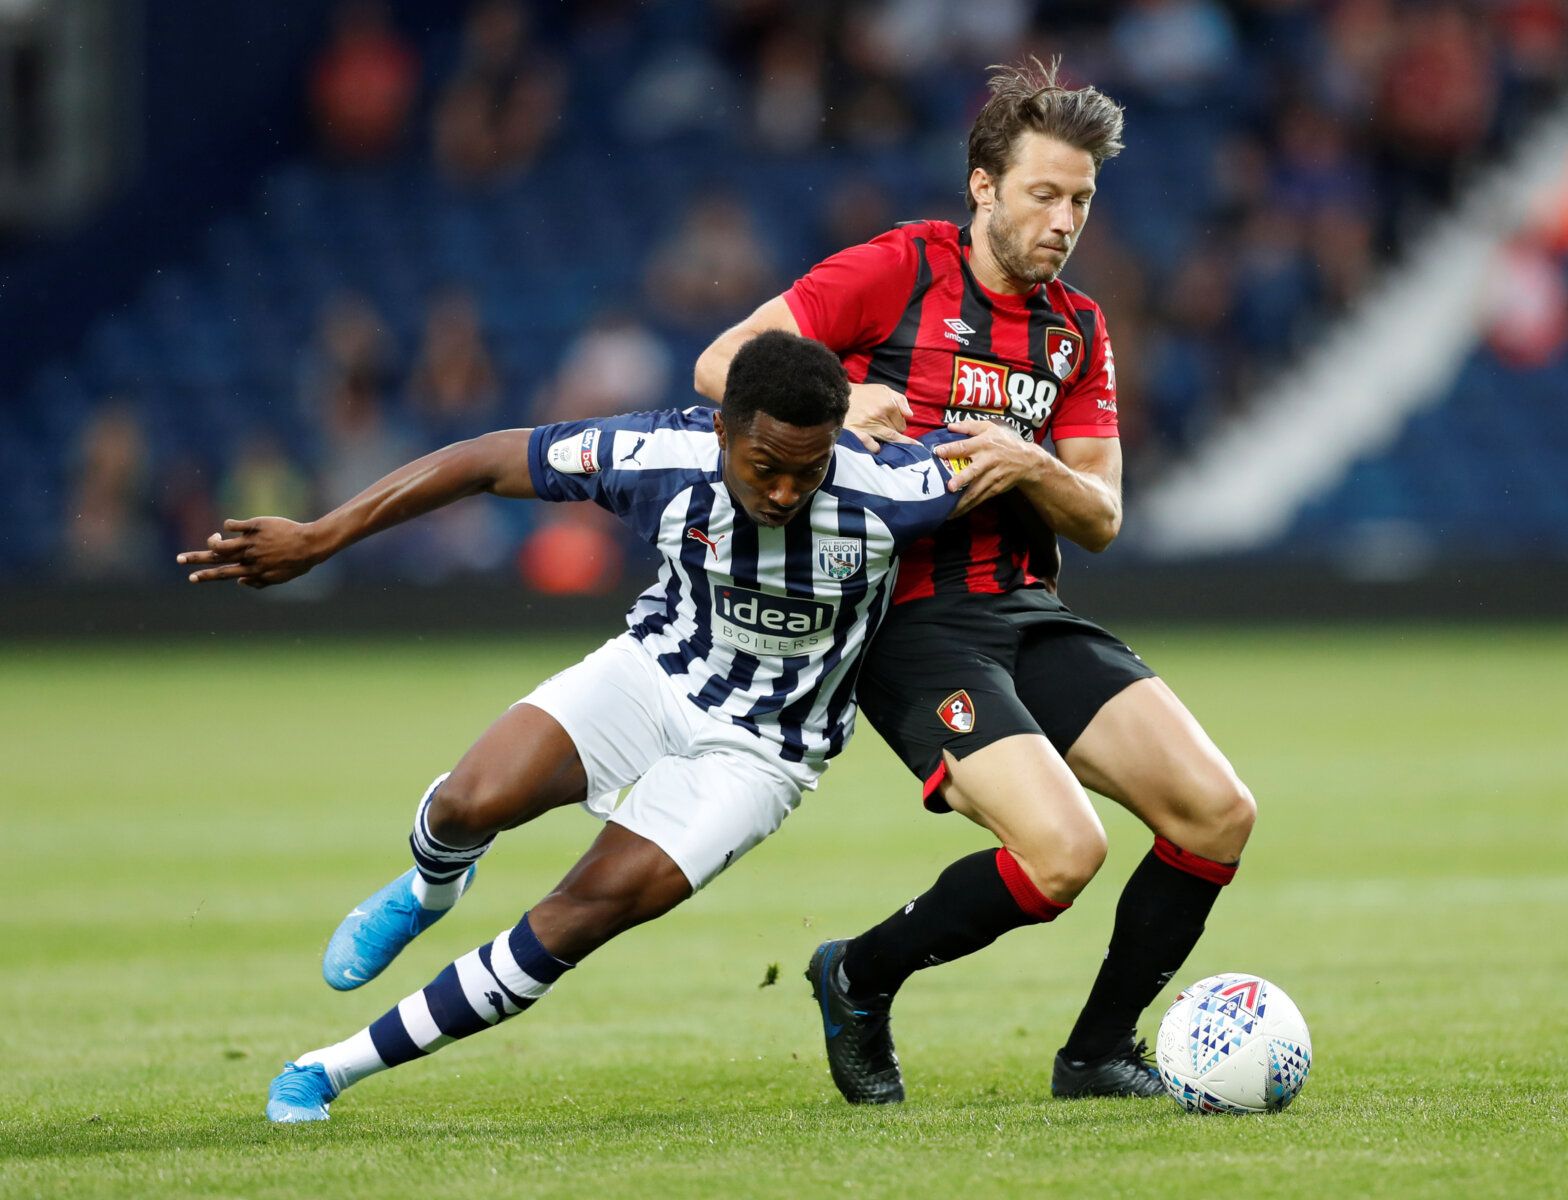 Soccer Football - Pre Season Friendly - West Bromwich Albion v AFC Bournemouth - The Hawthorns, West Bromwich, Britain - July 26, 2019   West Brom's Kyle Edwards in action with Bournemouth's Harry Arter   Action Images via Reuters/Matthew Childs